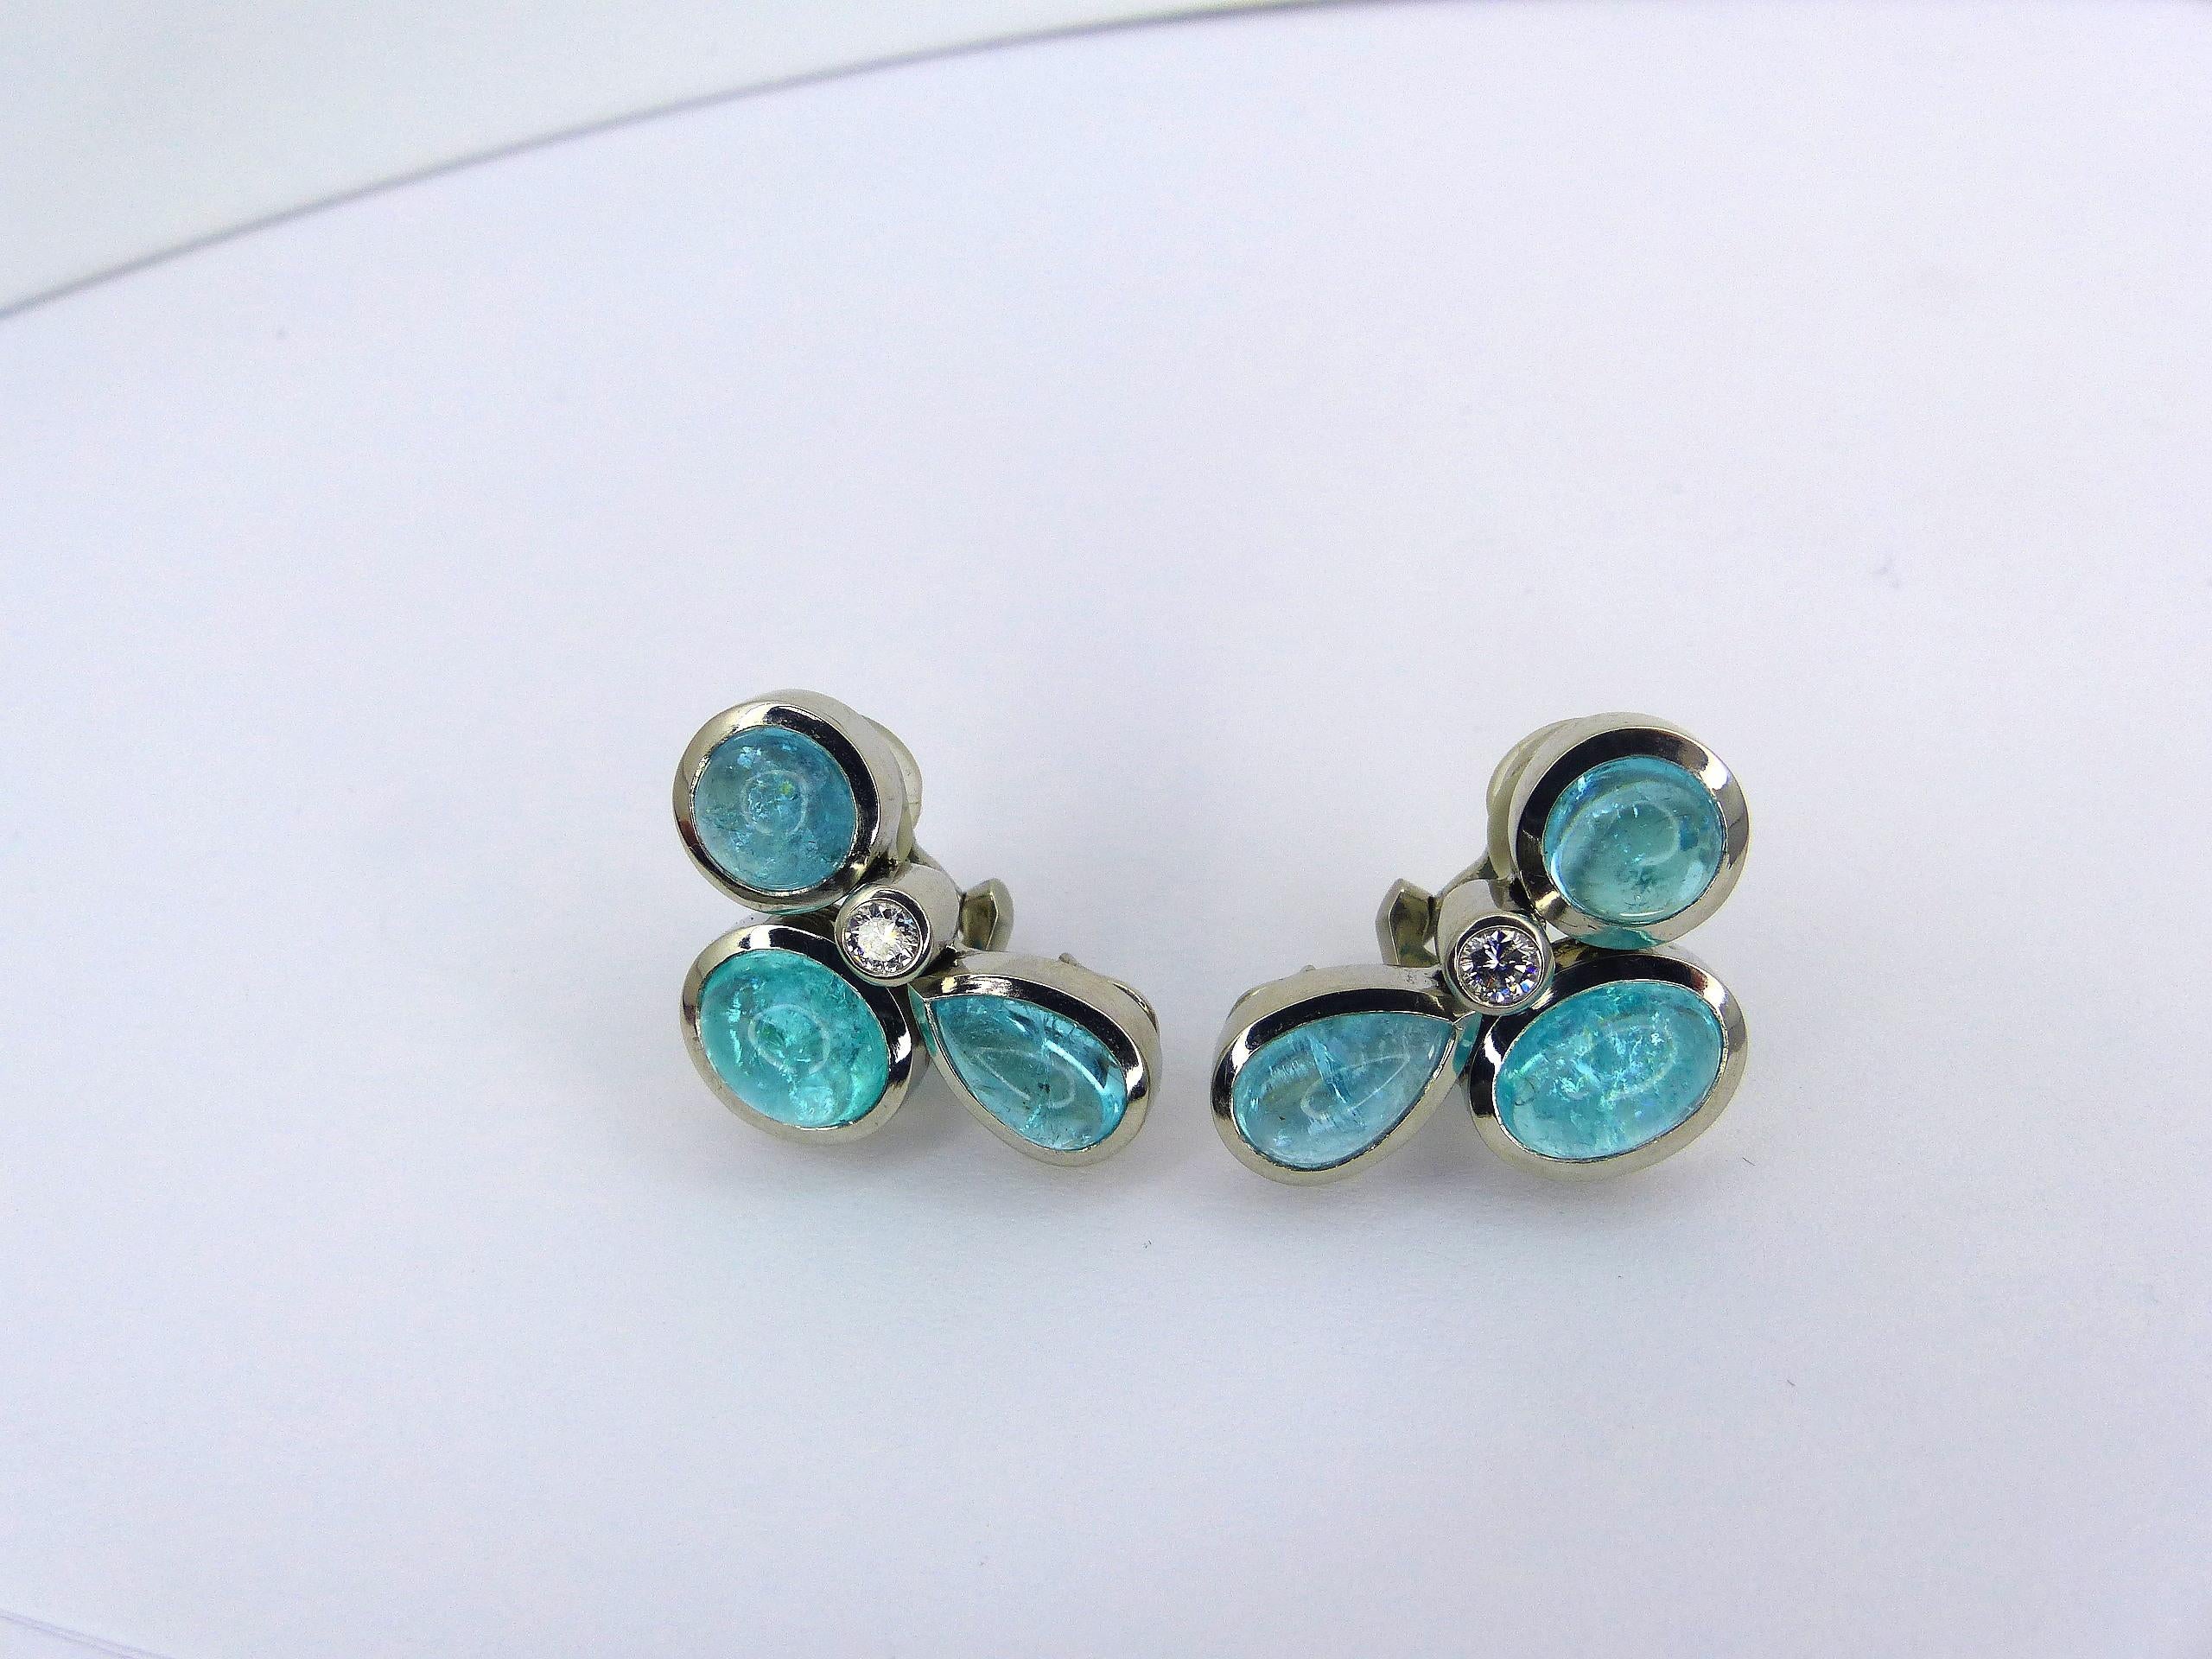 Women's Earrings in Platinum with 6 Paraiba Tourmaline Cabouchons and 2 Diamonds For Sale